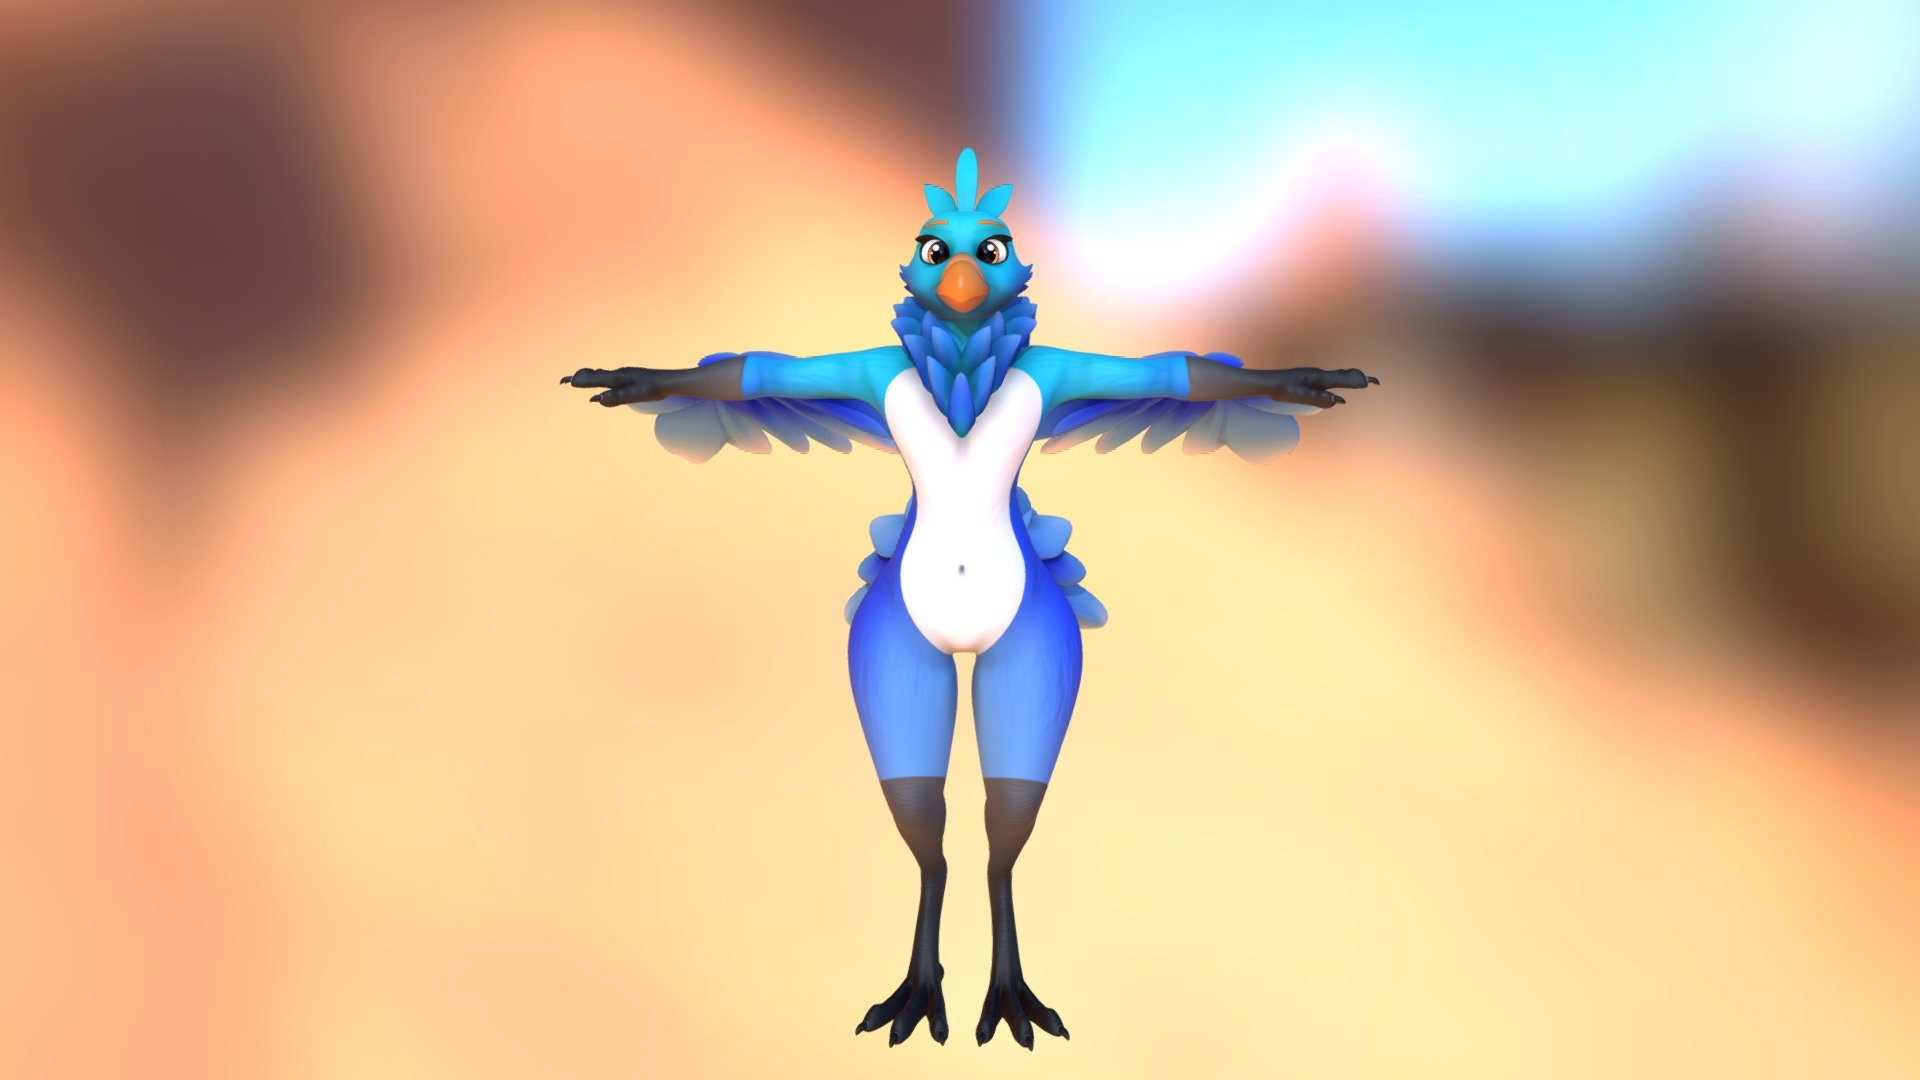 VR ready bird avatar! Available on Patreon May 2021! https://www.patreon.com/vr_zab after it leaves Patreon, check for it on my Gumroad (vr_zab)! All my links are here: https://linktr.ee/vr_zab

Full body compatible, Quest version included, with High and Low poly PC versions too! - Bird - VRChat & VTuber Avatar - 3D model by Zab (@lixyco) 3d model